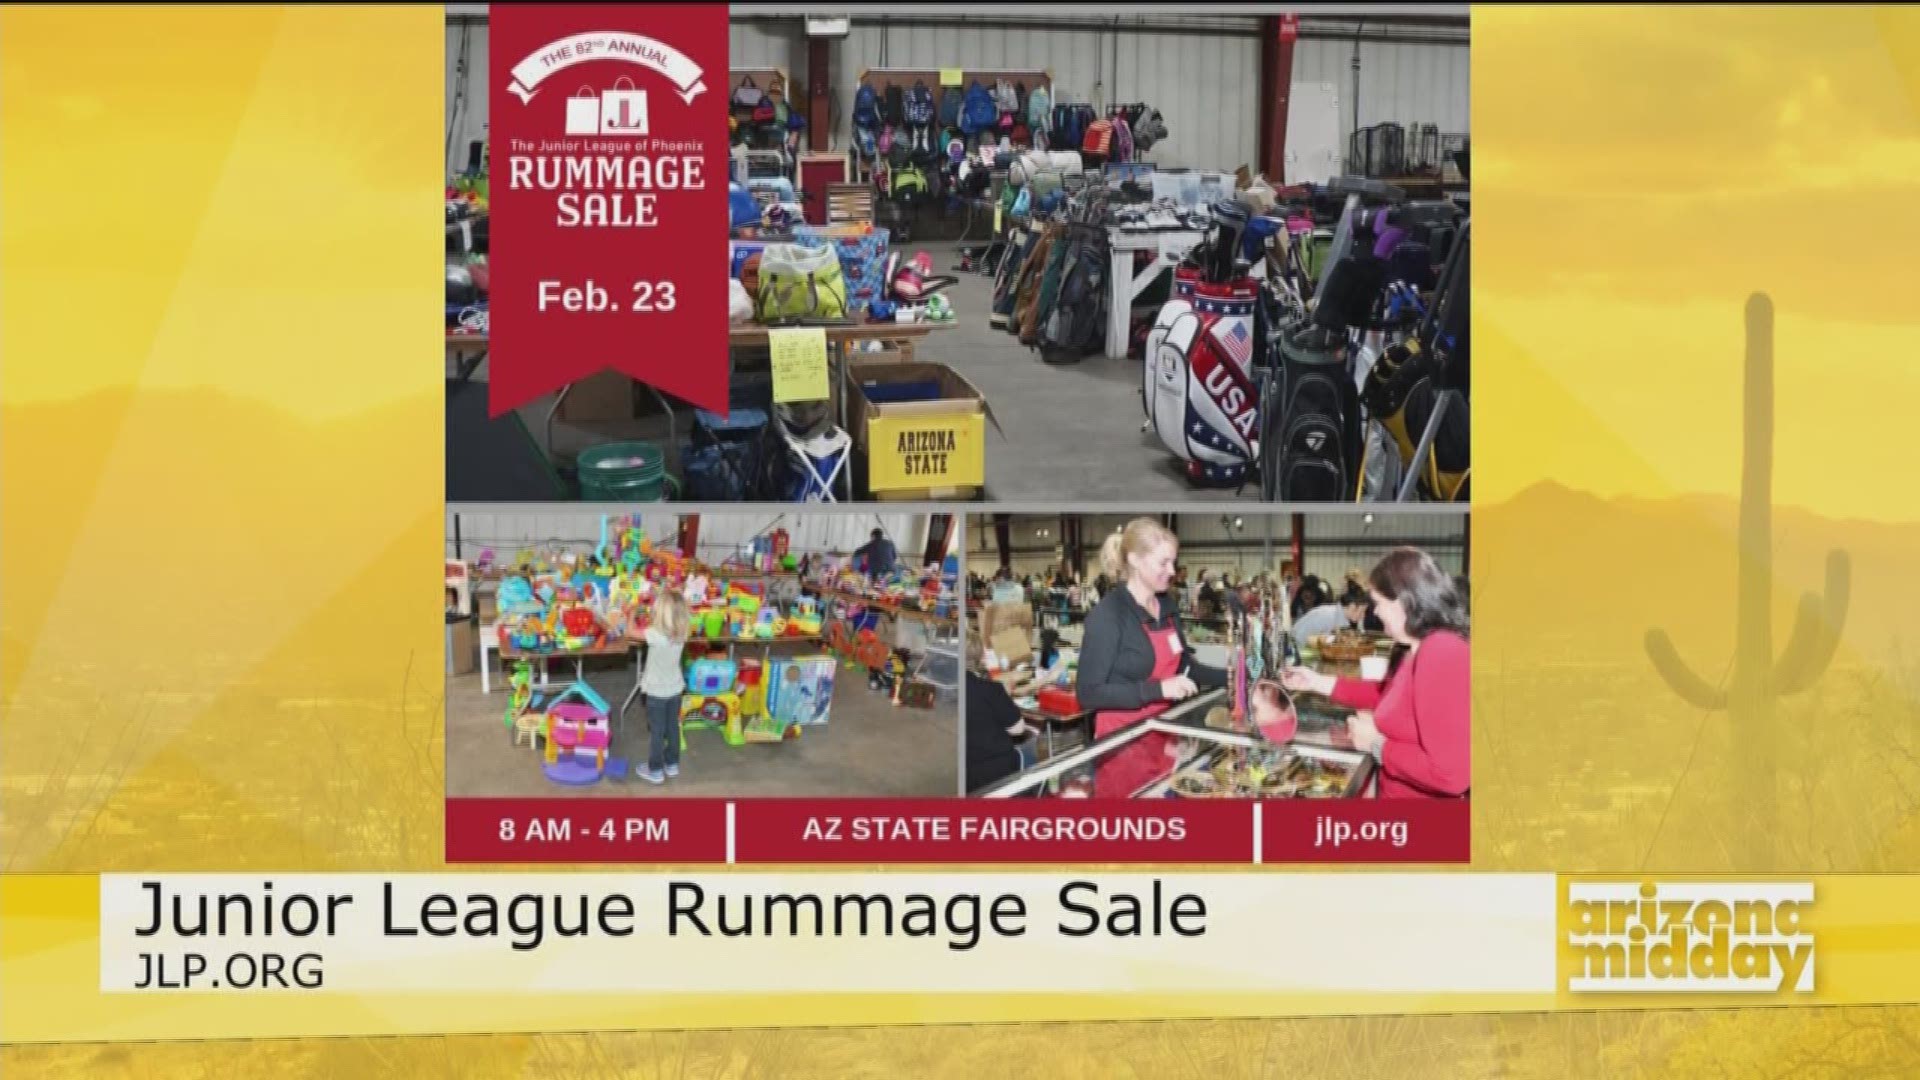 Spend the day shopping and supporting the community at the Junior League of Phoenix Rummage Sale. Wendy Brooks shows us some of the greatest finds you'll make there!